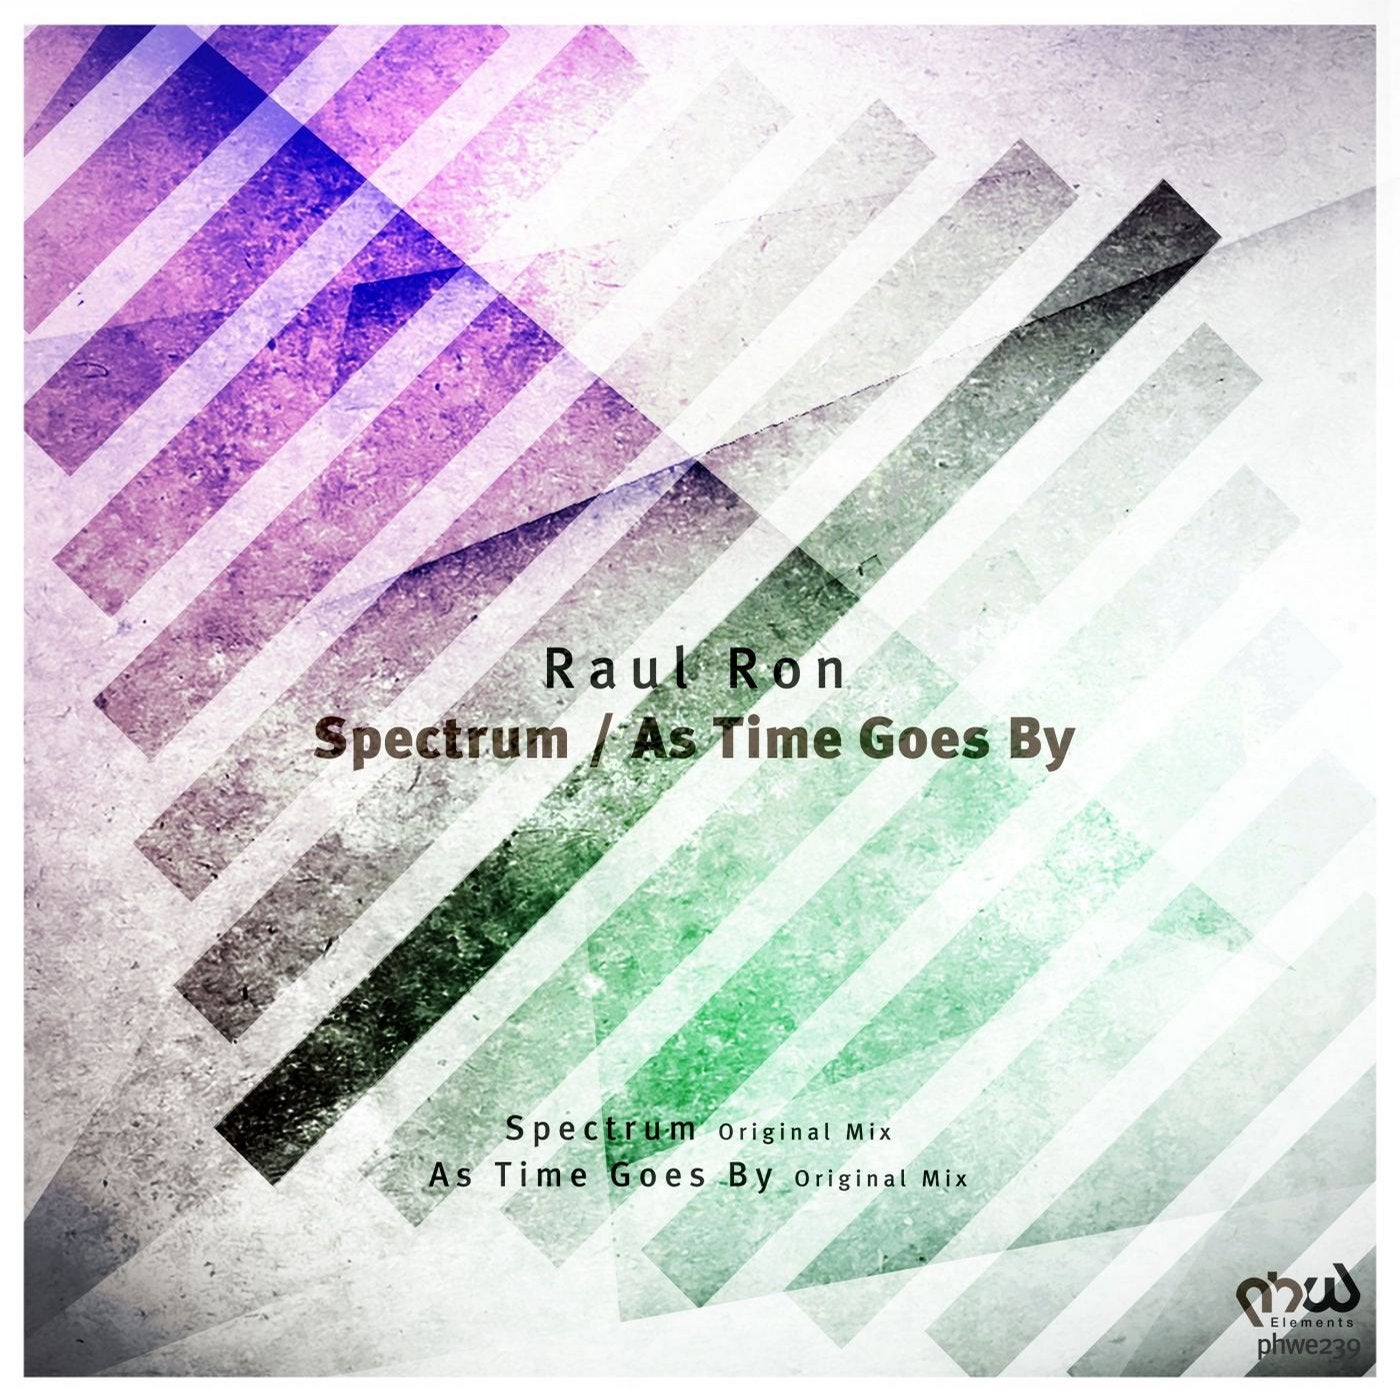 Spectrum / as Time Goes By